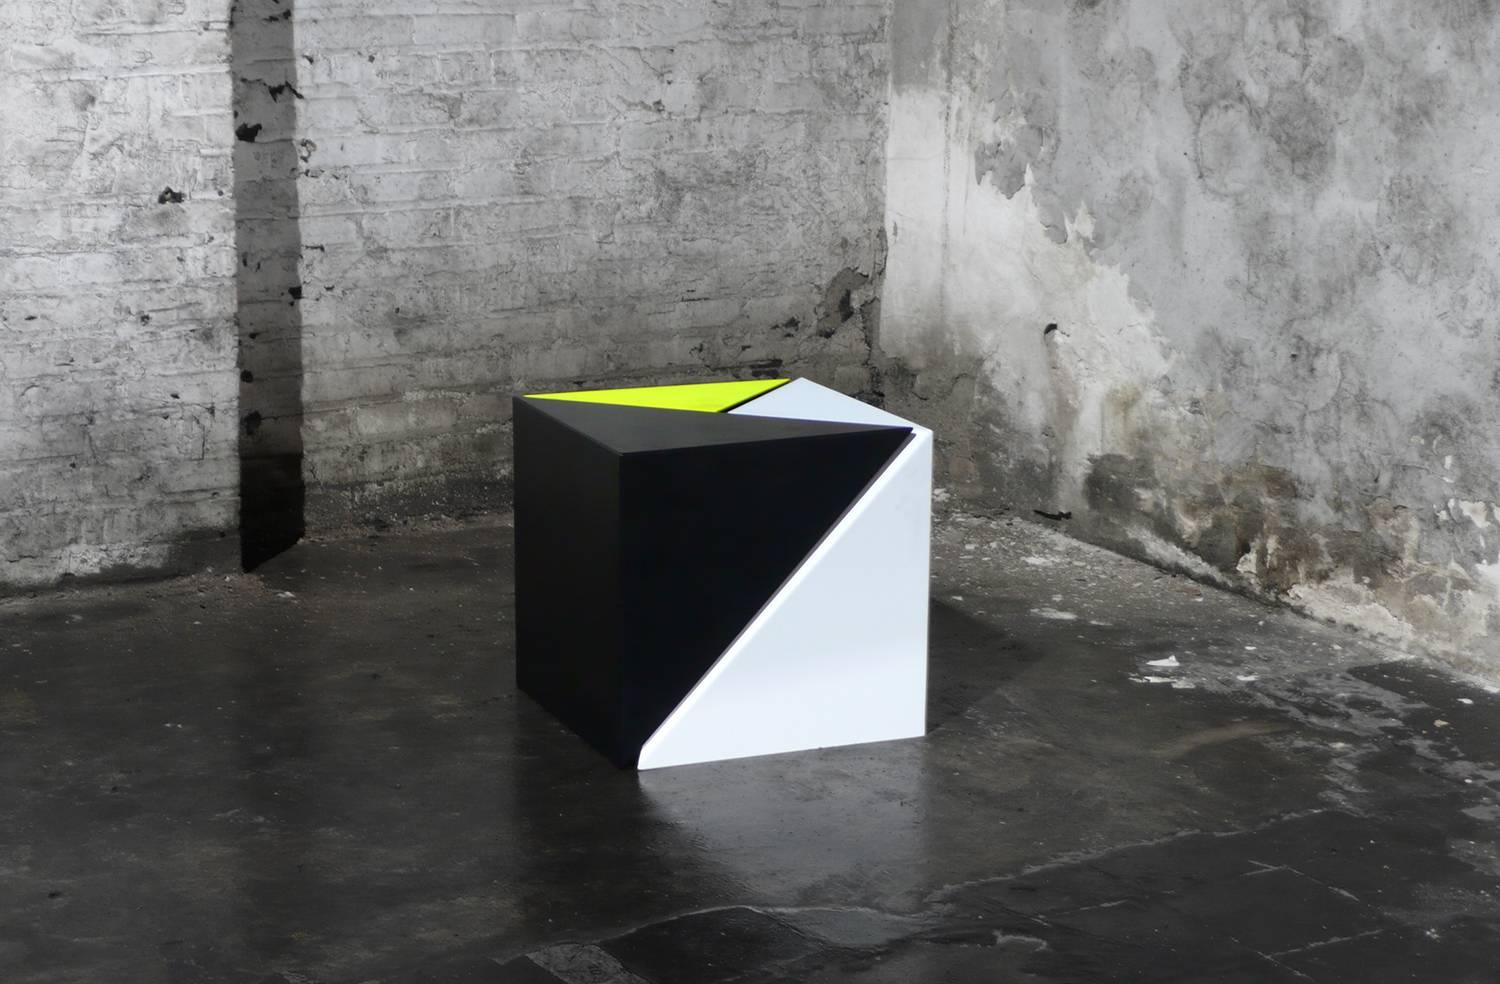 3:1 challenges the nesting table archetype with three unique pieces that intersect in three dimensions. 3:1 functions as a single cube or as three distinct side tables. It is comprised of matte powder-coated steel.

Custom colors available.